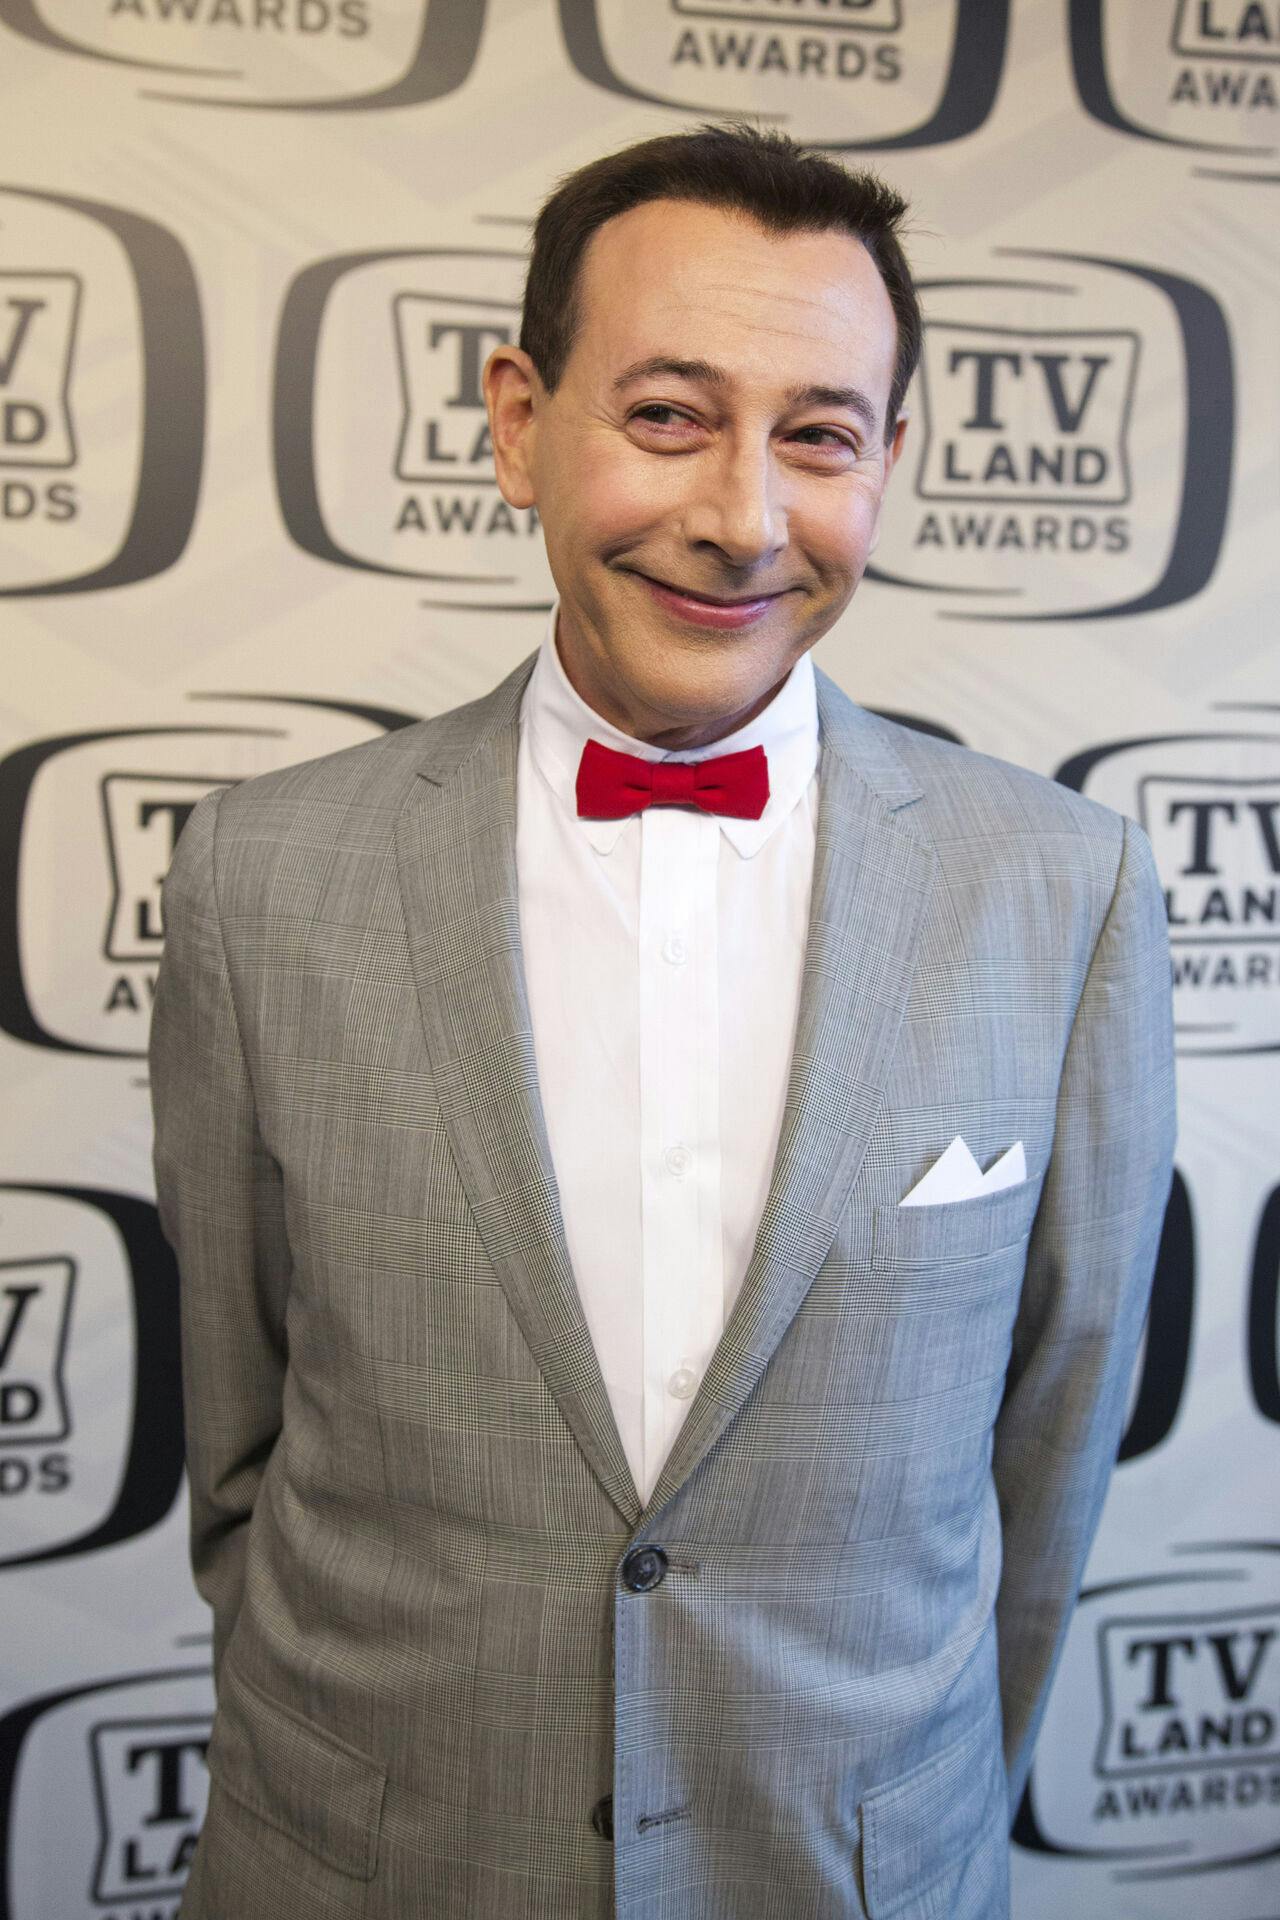 Paul Reubens arrives to the TV Land Awards 10th Anniversary in New York, Saturday, April 14, 2012. (AP Photo/Charles Sykes)